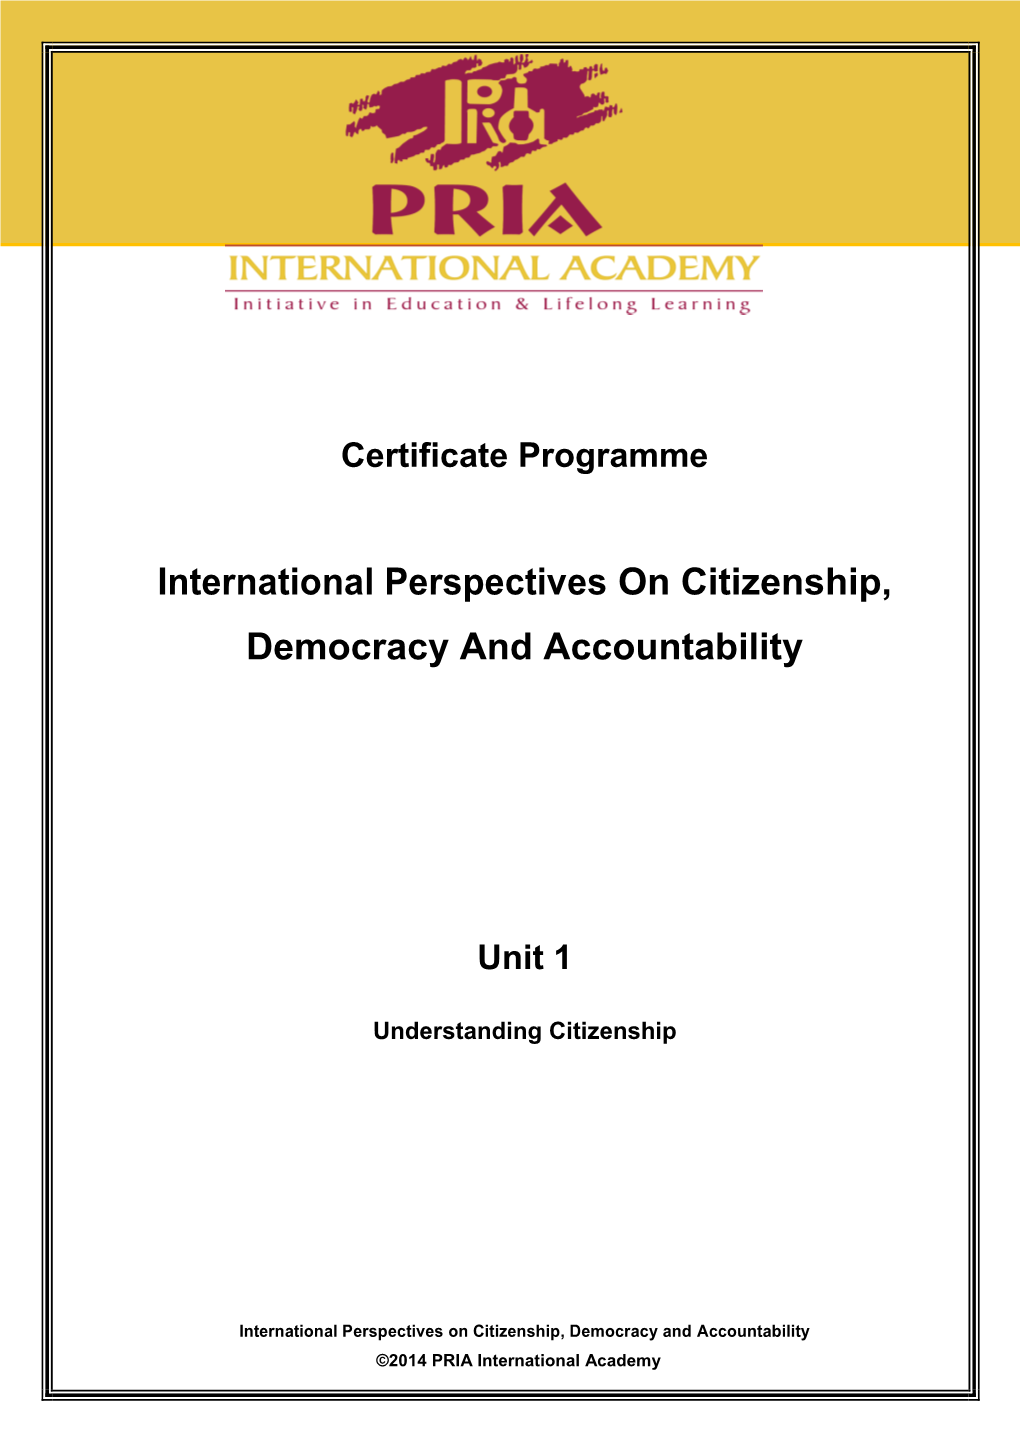 International Perspectives on Citizenship, Democracy and Accountability